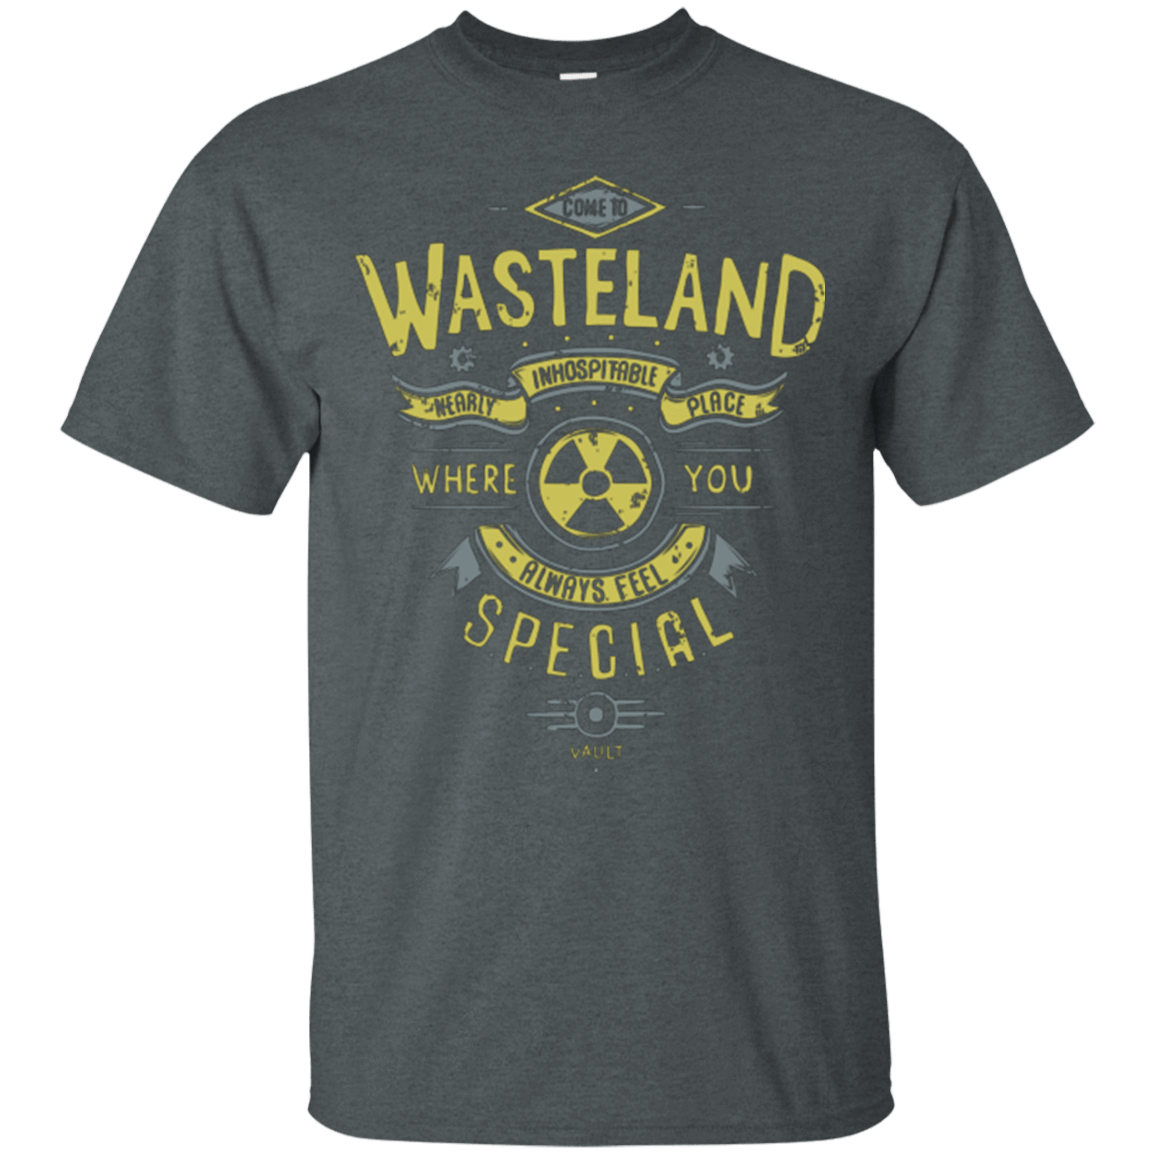 T-Shirts Dark Heather / Small Come to wasteland T-Shirt